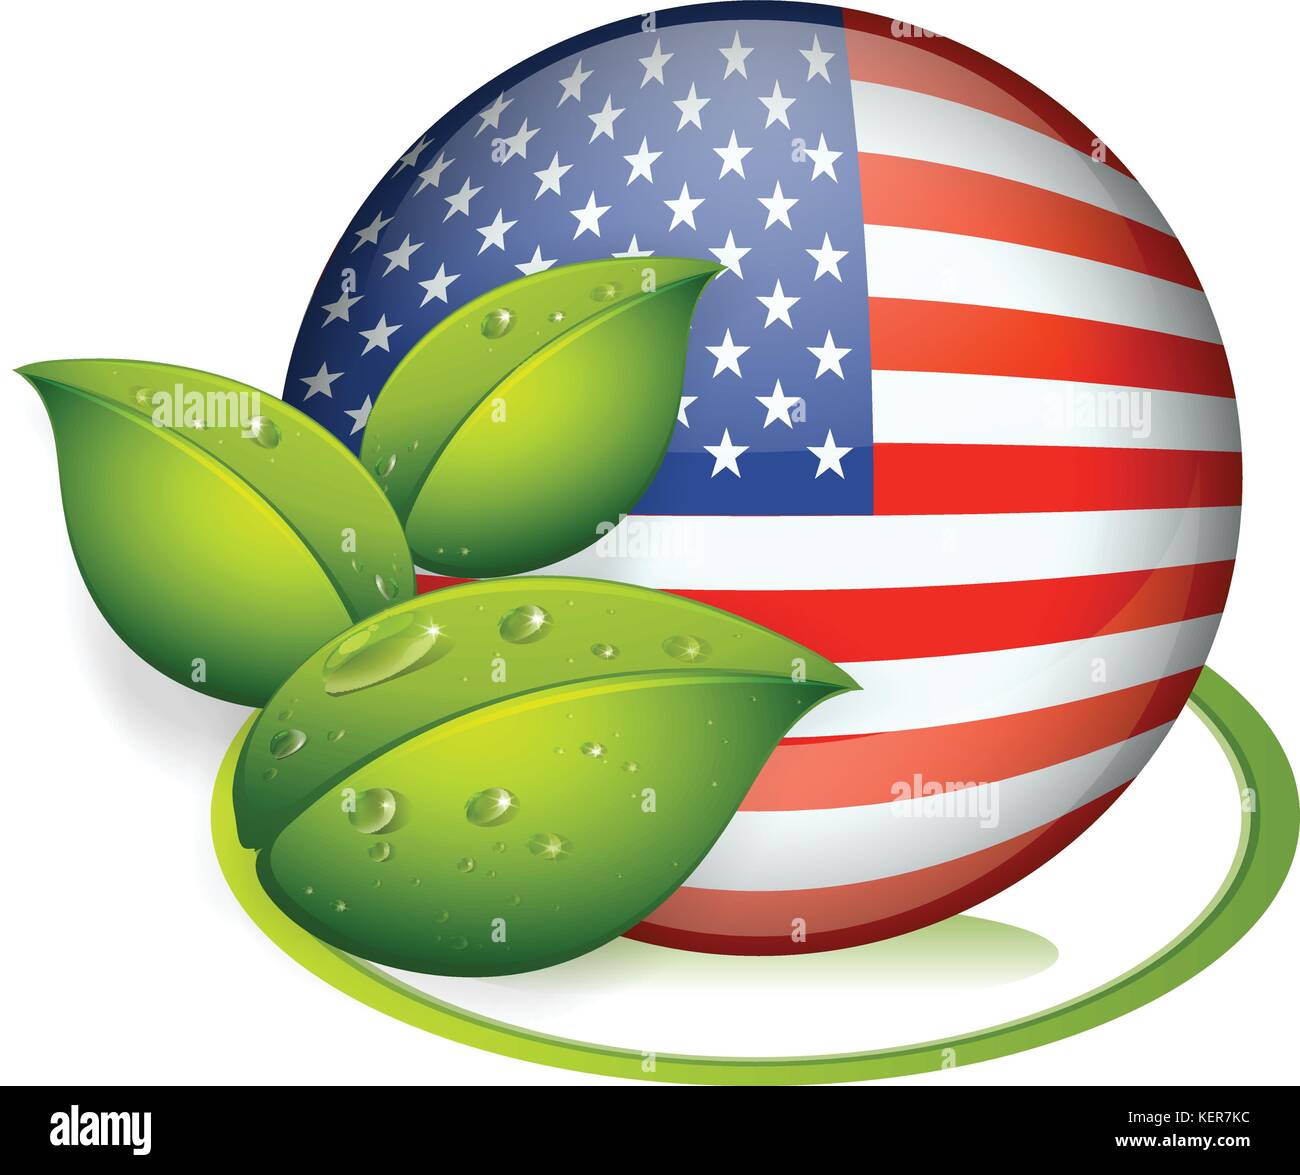 Illustration of a ball with the flag of the United States and with leaves on a white background Stock Vector